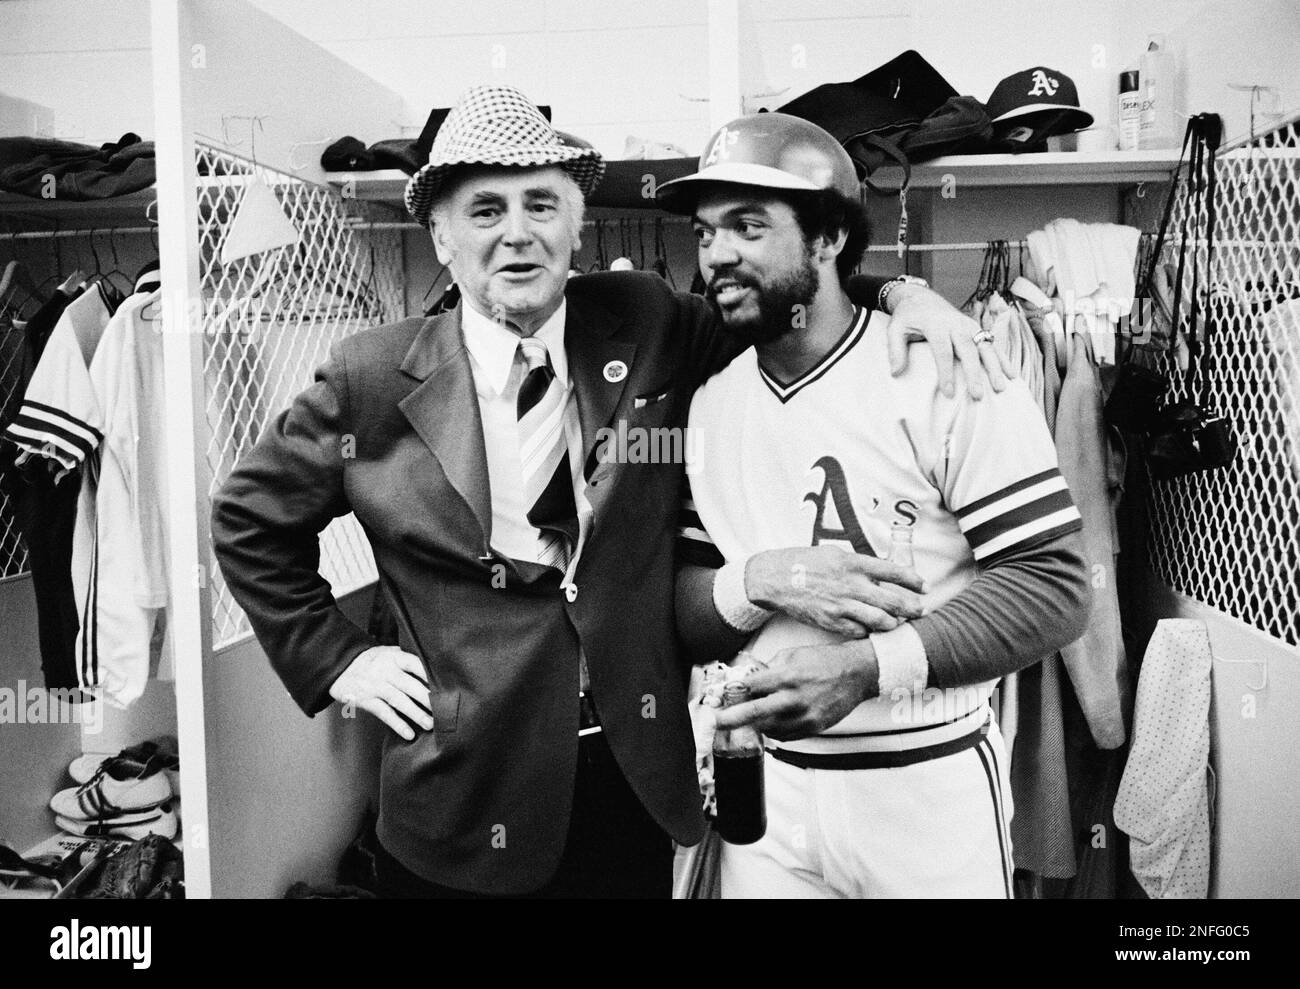 1970s Baseball - 1974: Oakland A's Owner Charlie Finley poses with